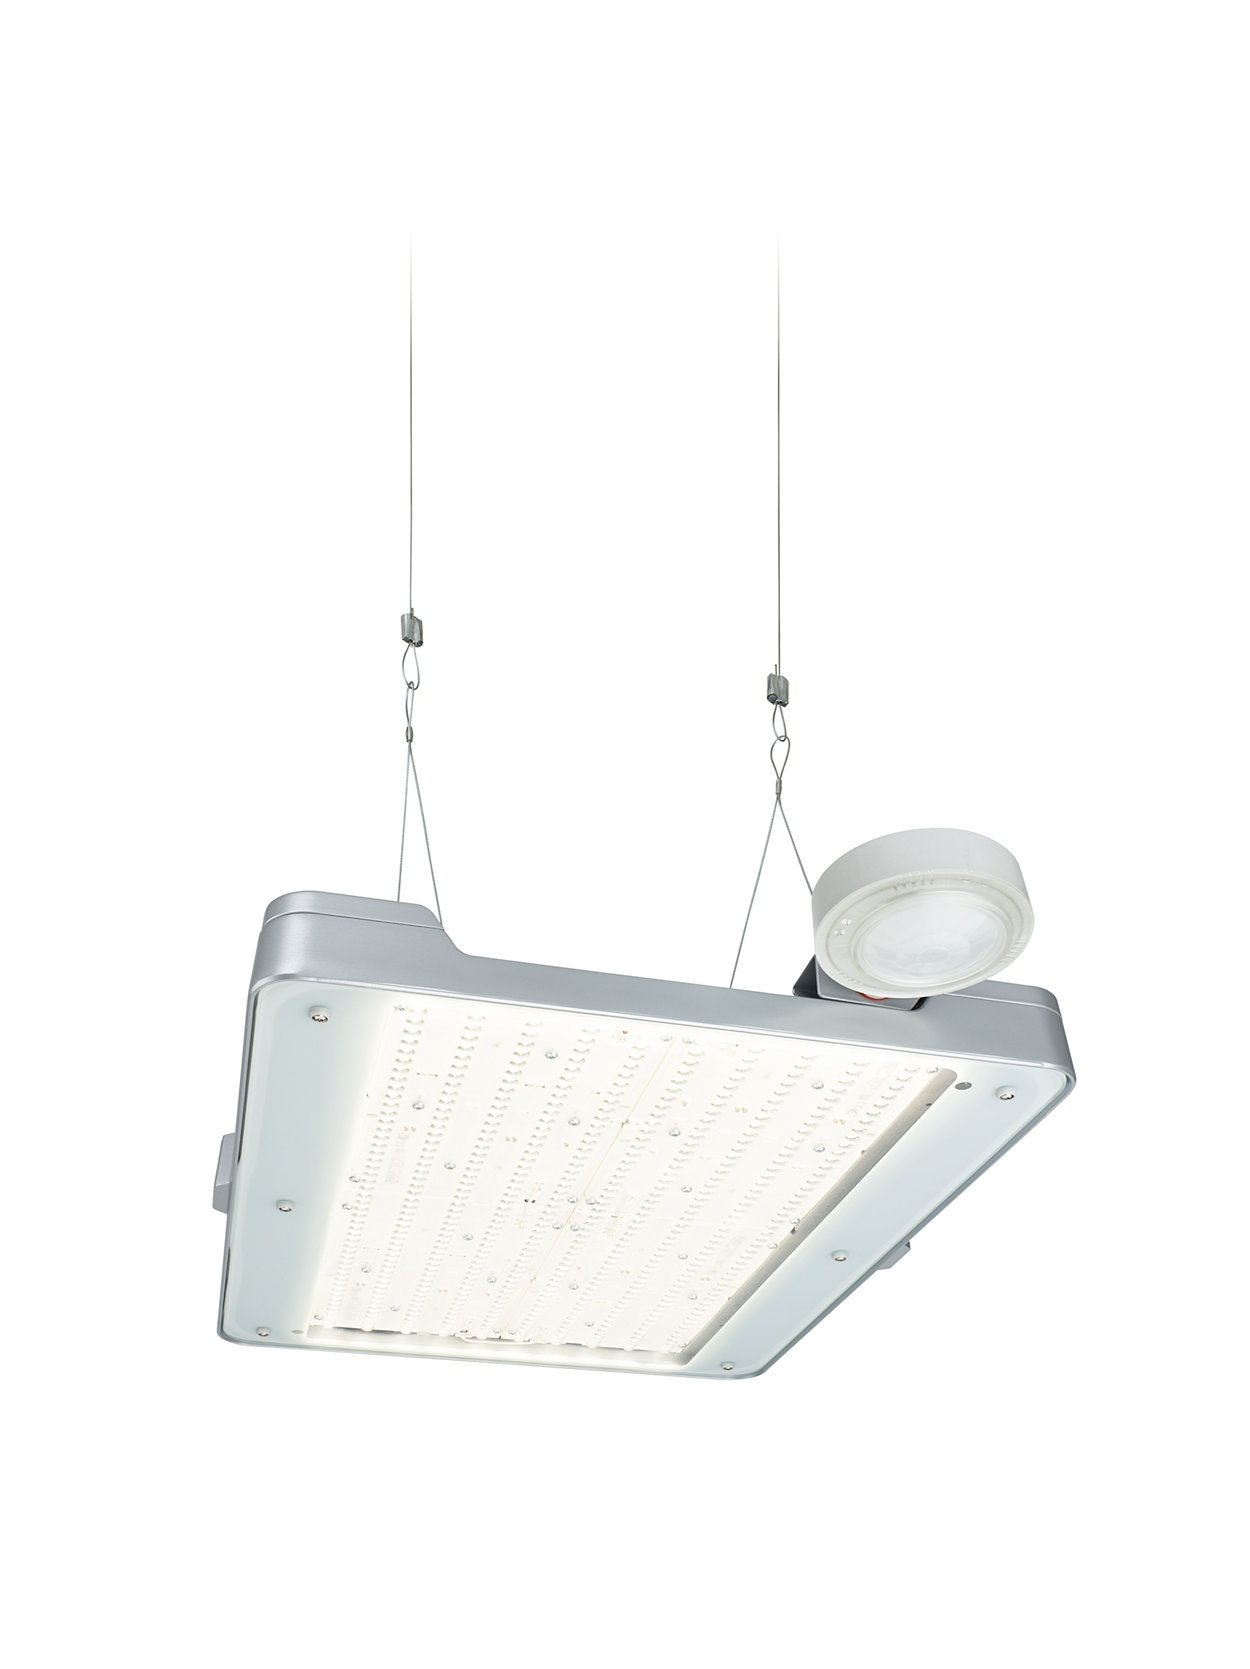 Adaptable high-bay lighting offering high efficiency and connectivity options to lighting systems and software applications.